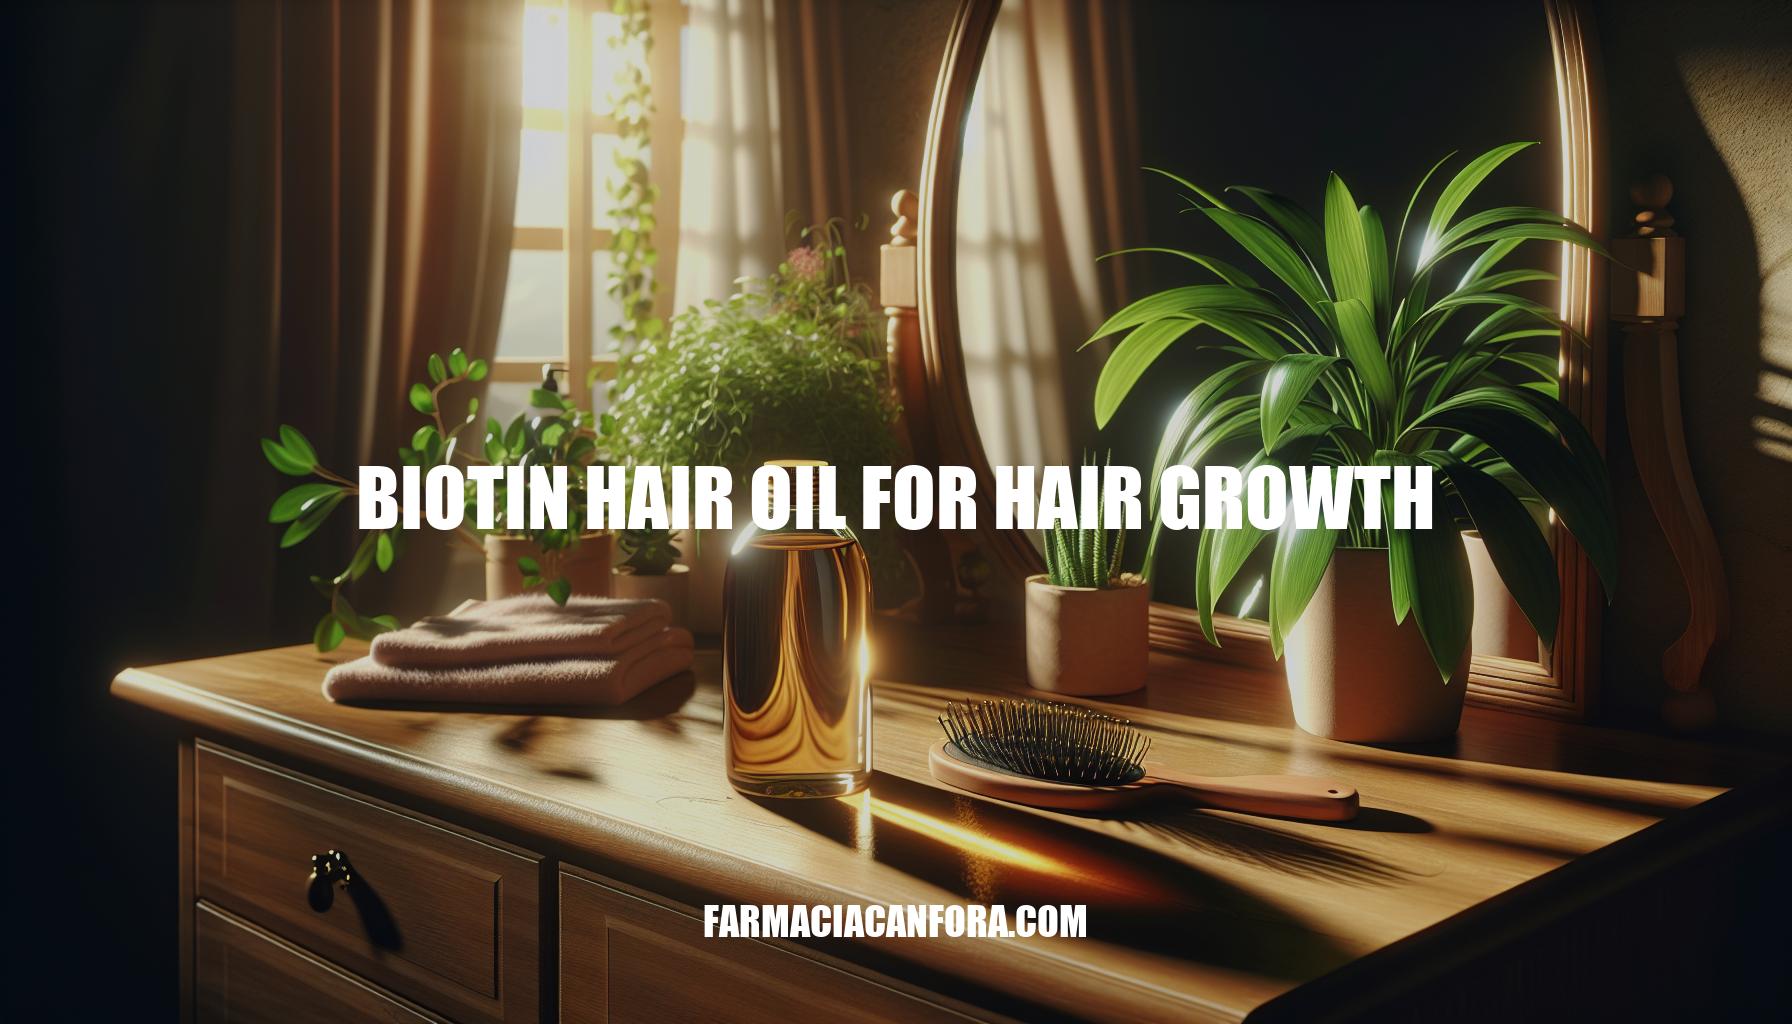 The Ultimate Guide to Biotin Hair Oil for Hair Growth